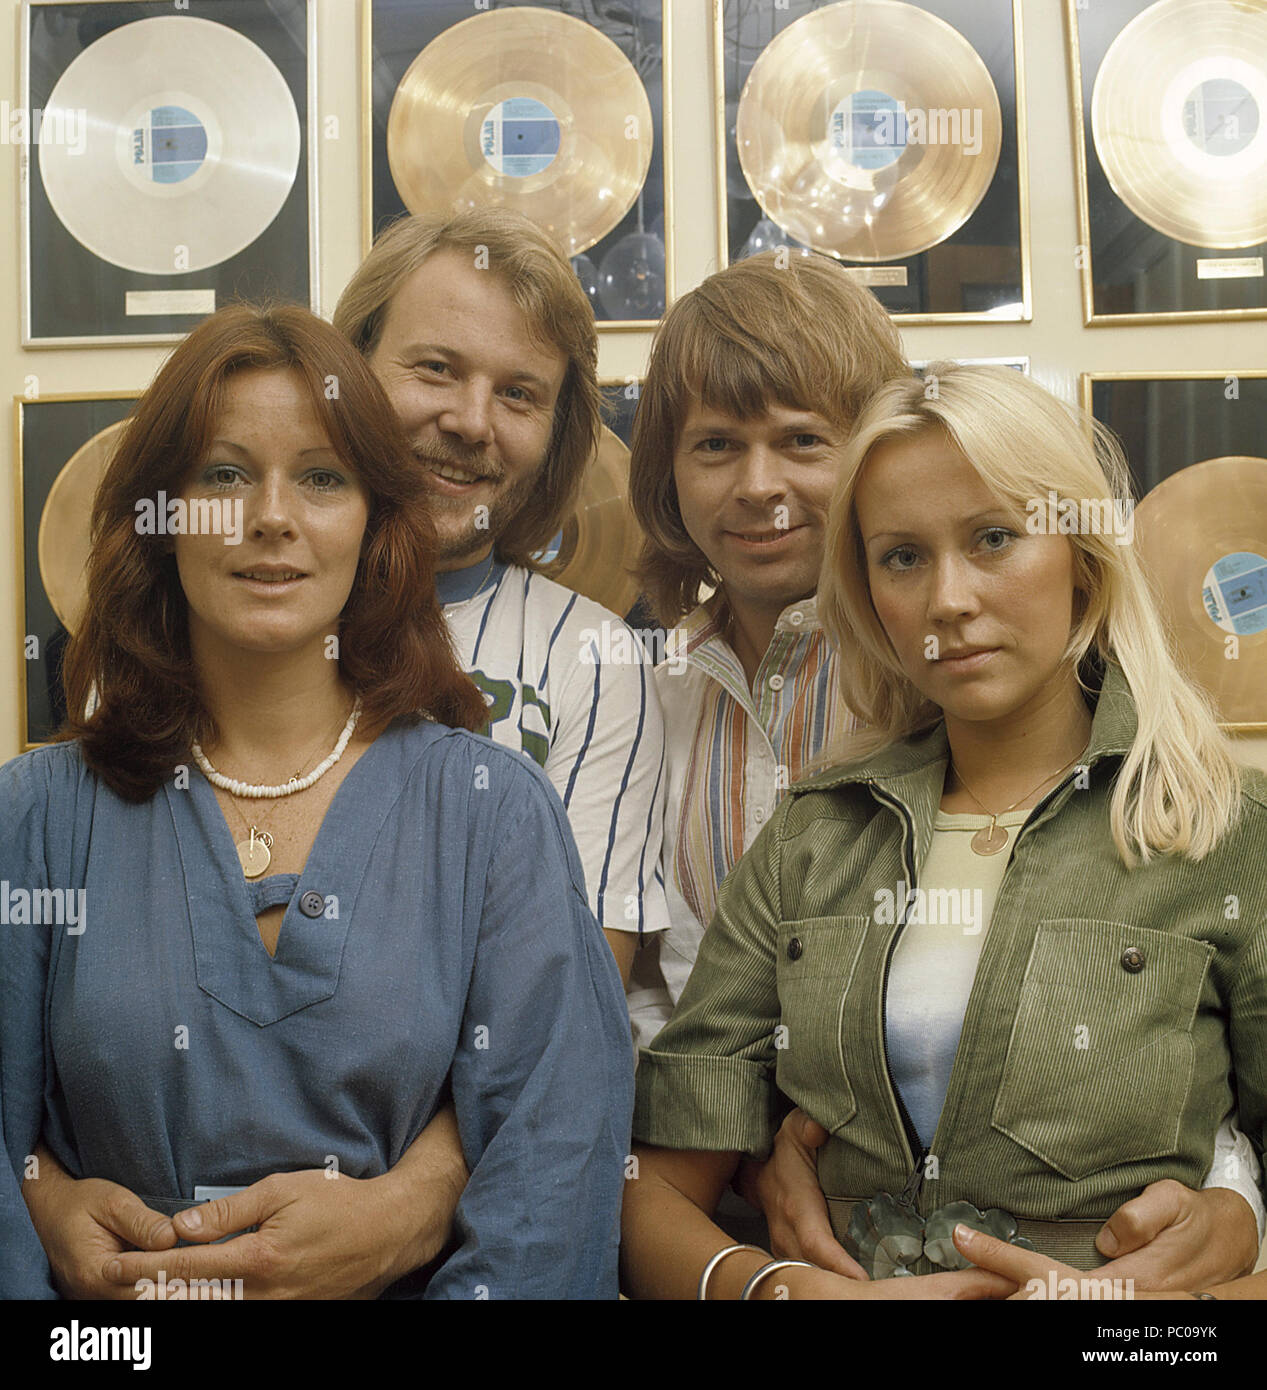 ABBA. Anni-Frid Lyngstad, Benny Andersson, Agnetha Fältskog and Björn Ulvaeus in the 1970s in front of a wall full of gold records for record selling albums. Stock Photo